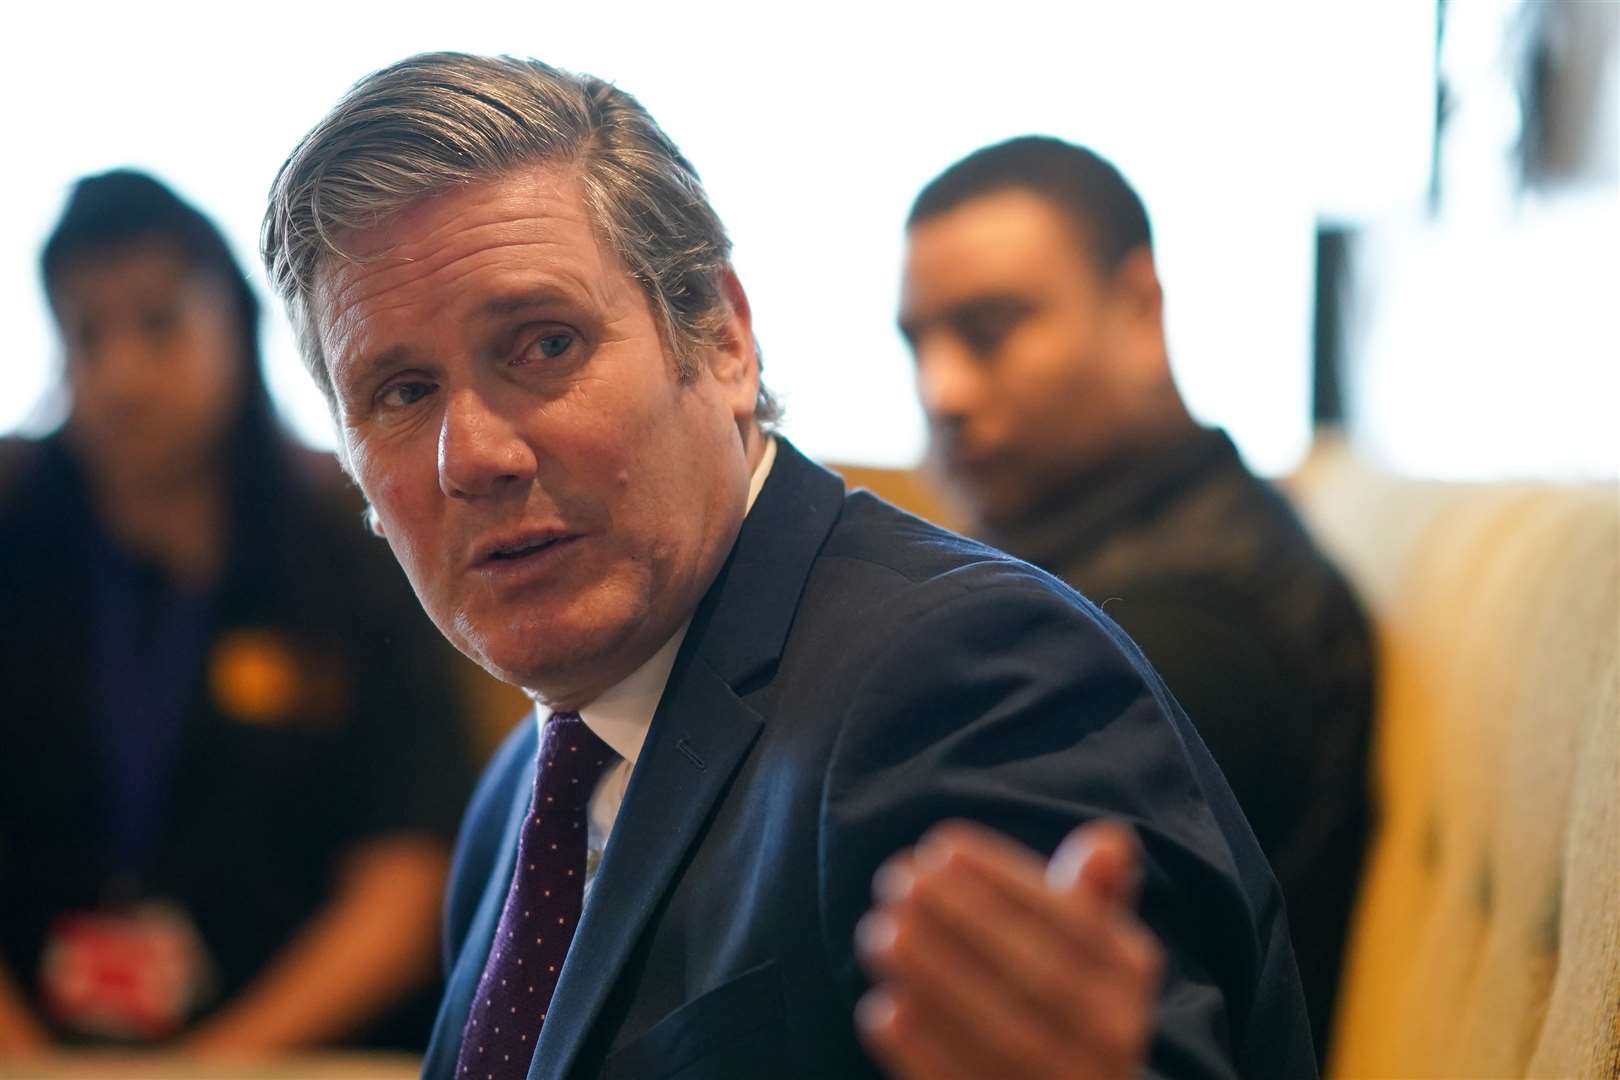 Labour leader Sir Keir Starmer repeated his calls for an inquiry (Ian Forsyth/PA)